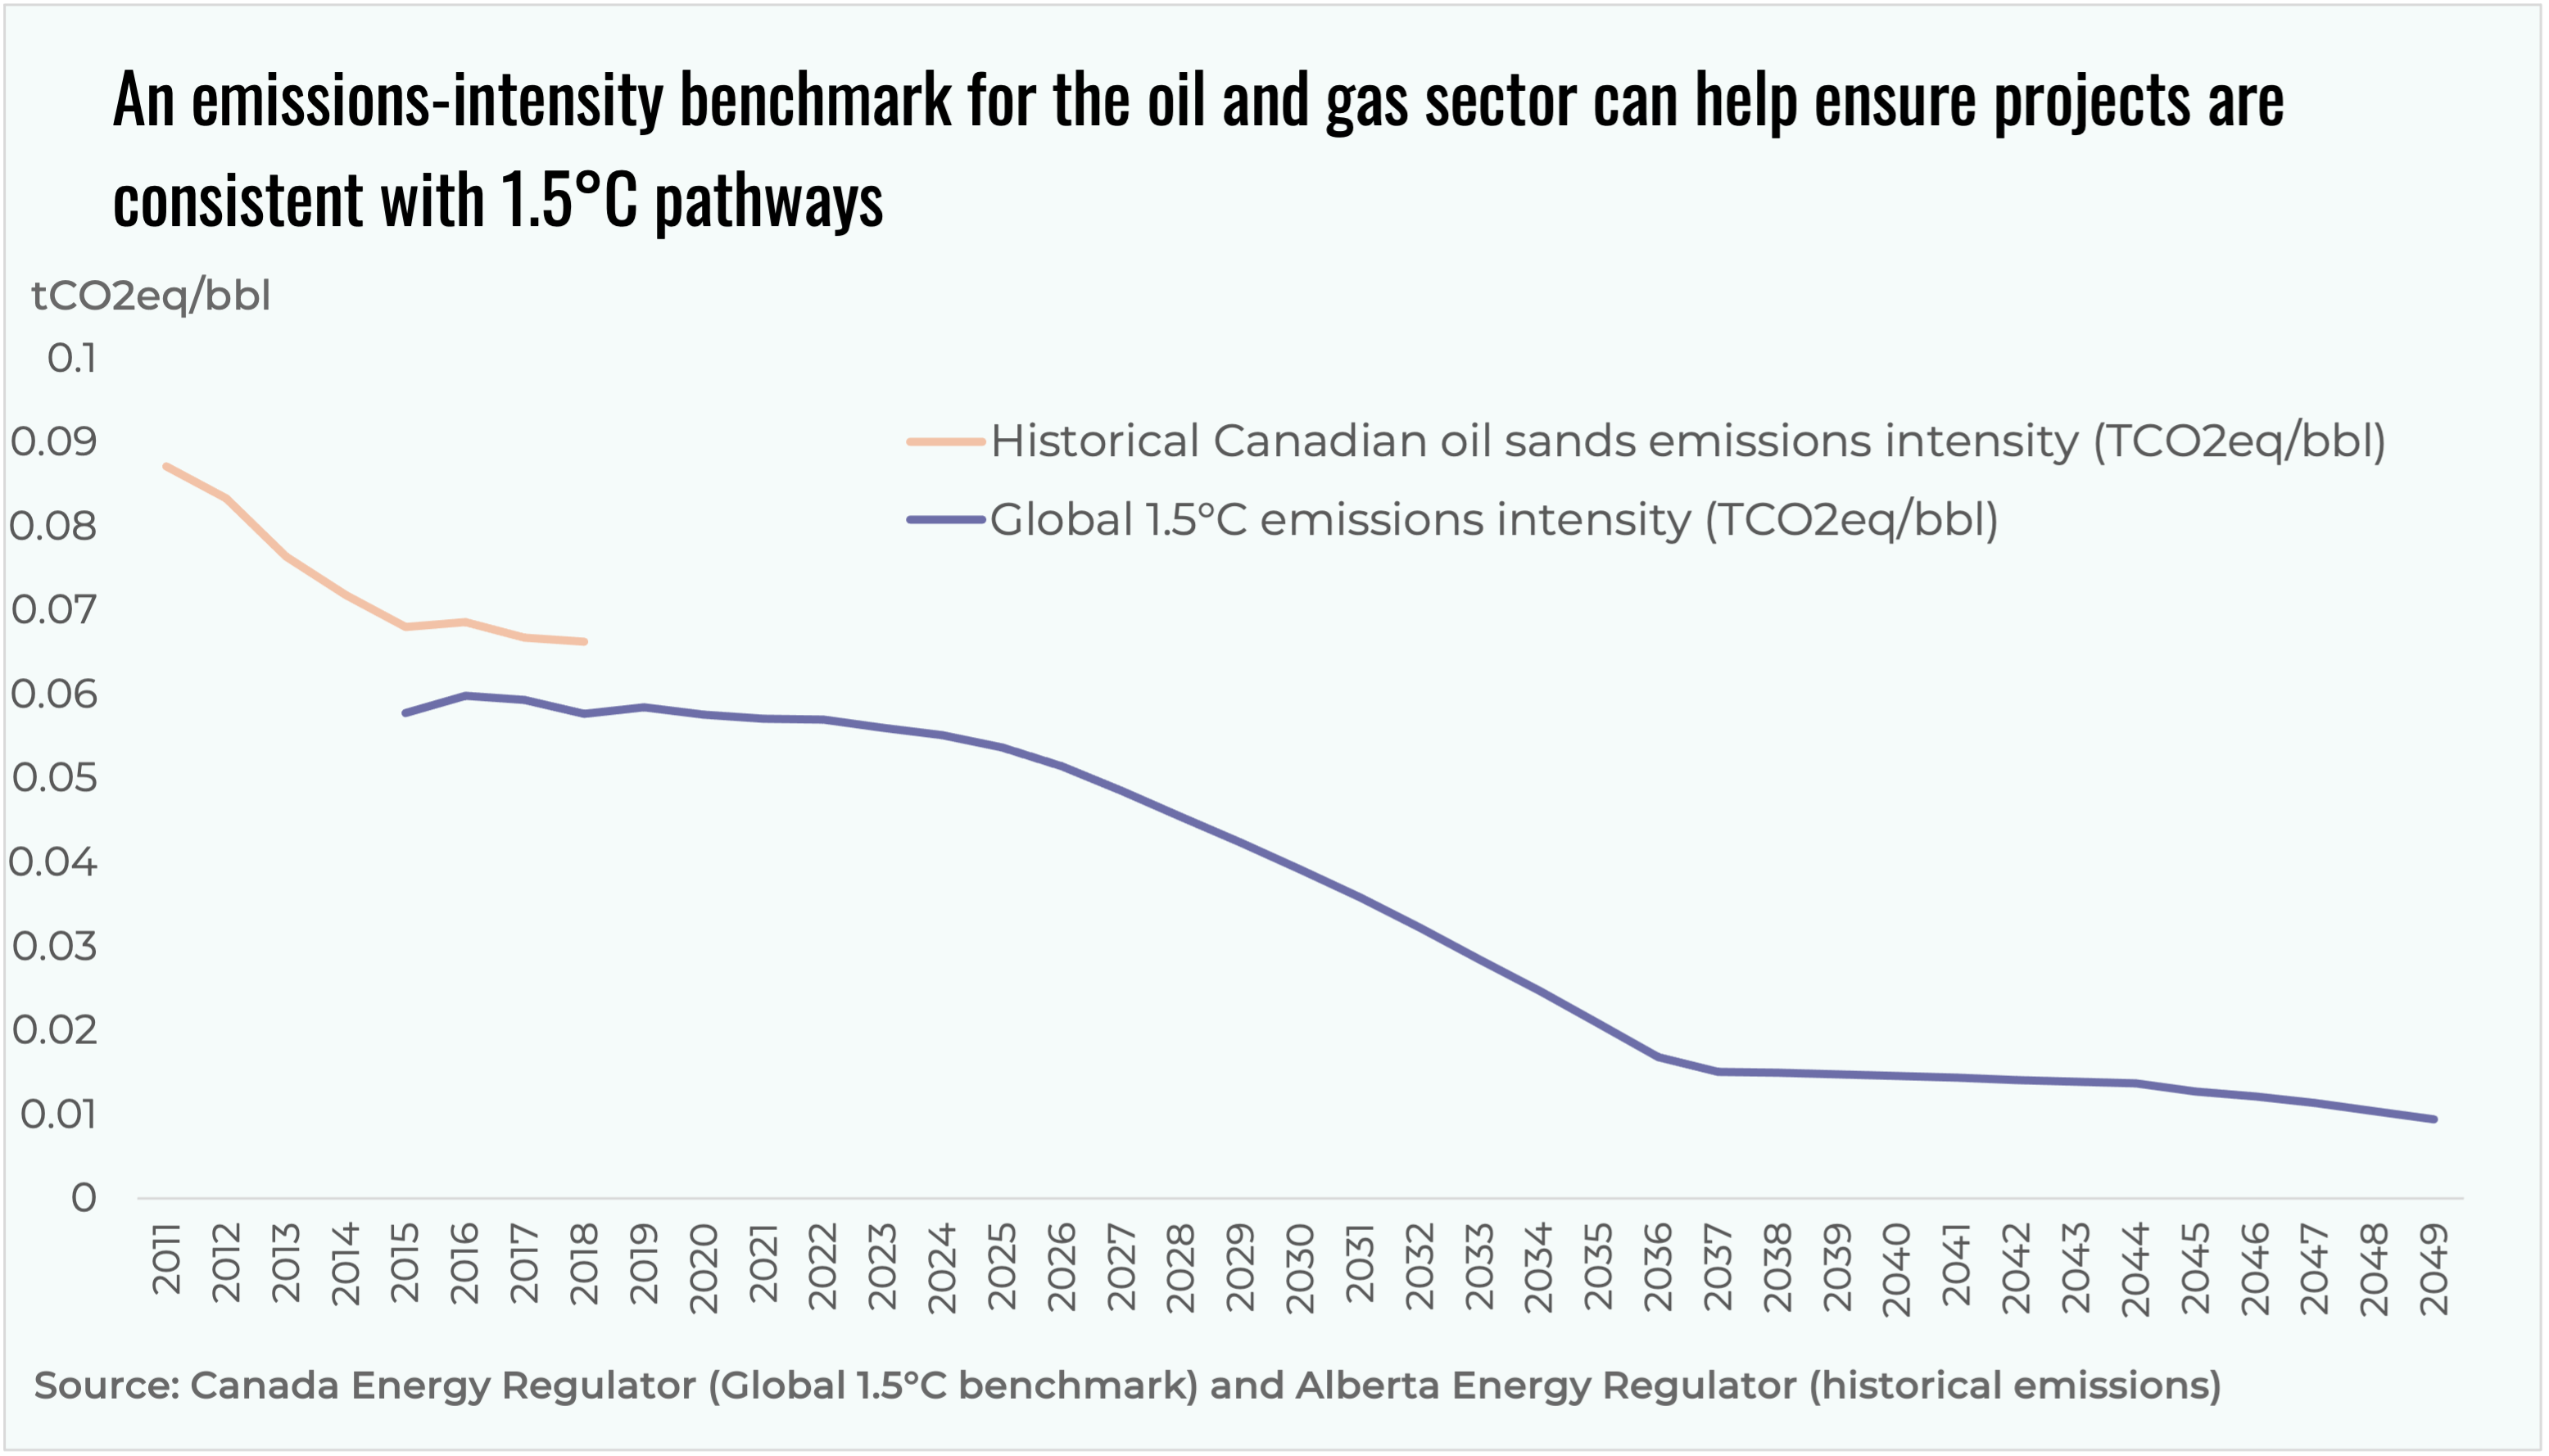 Here, we propose using an emissions-intensity benchmark for the oil and gas sector based on representative 1.5°C scenarios. The figure below shows how this type of benchmark could work in practice, using the emissions-intensity benchmark based on the Canada Energy Regulator's new Global Net Zero Scenario, along with the historical emissions from Canadian oilsands. A project would need to show how specific investments will keep it below this benchmark through time.